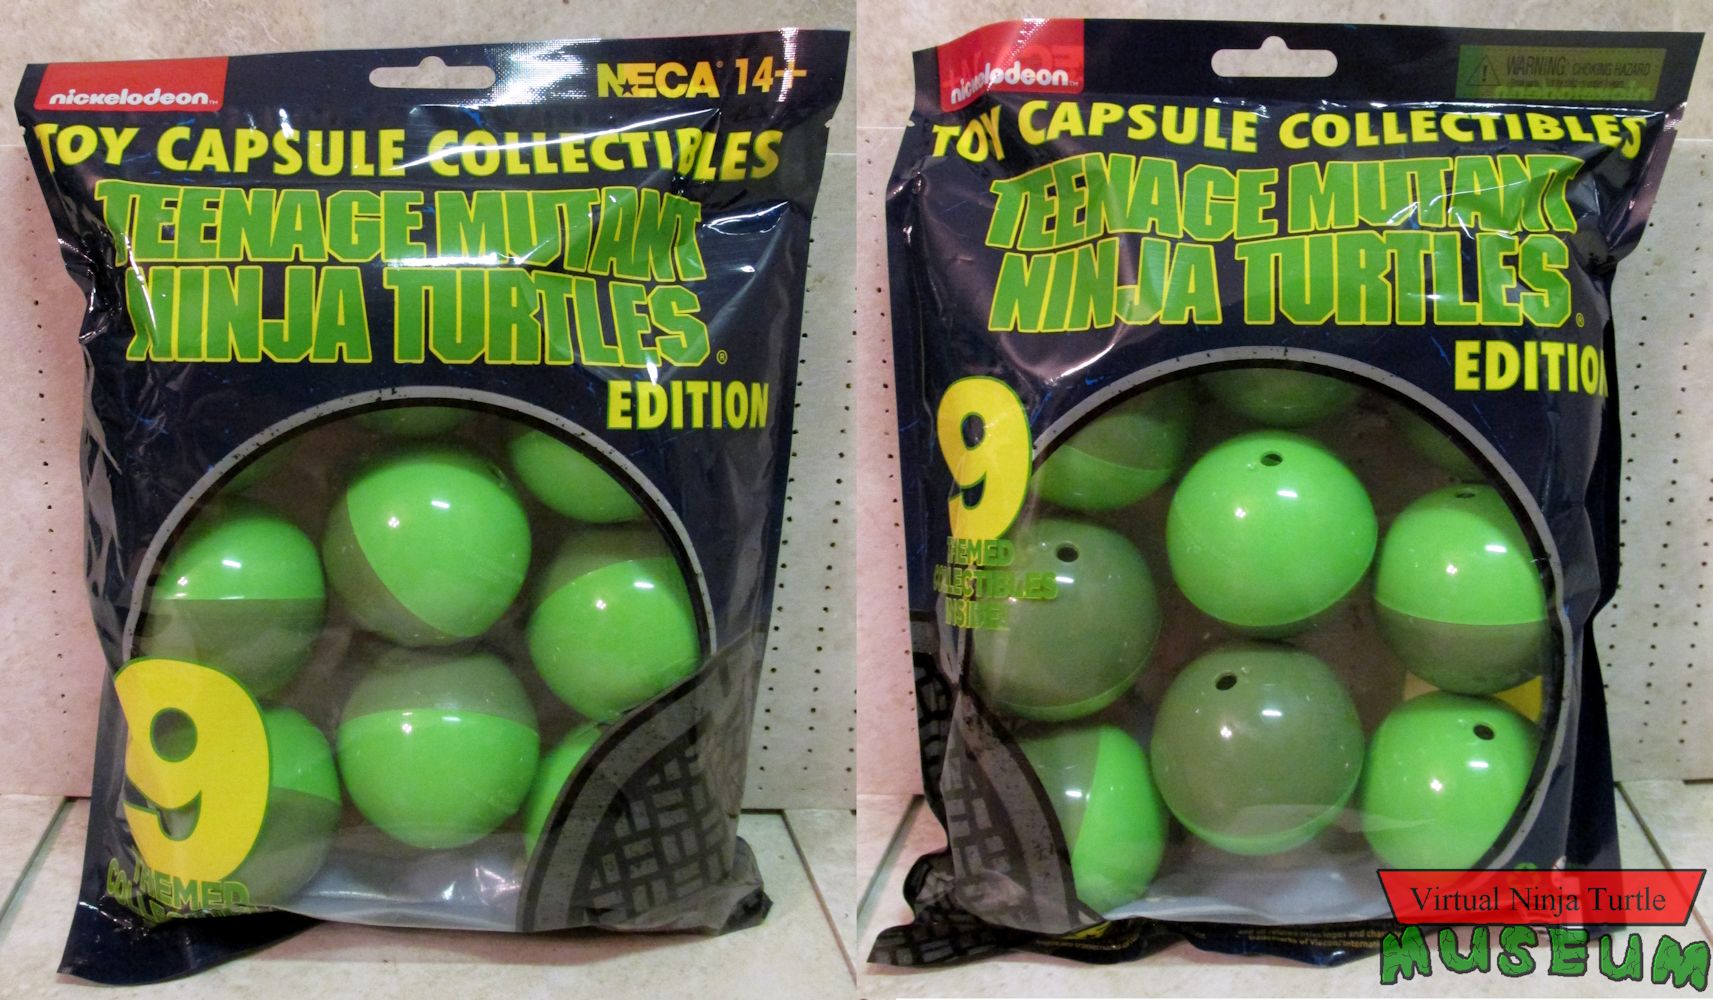 packaging front and rear